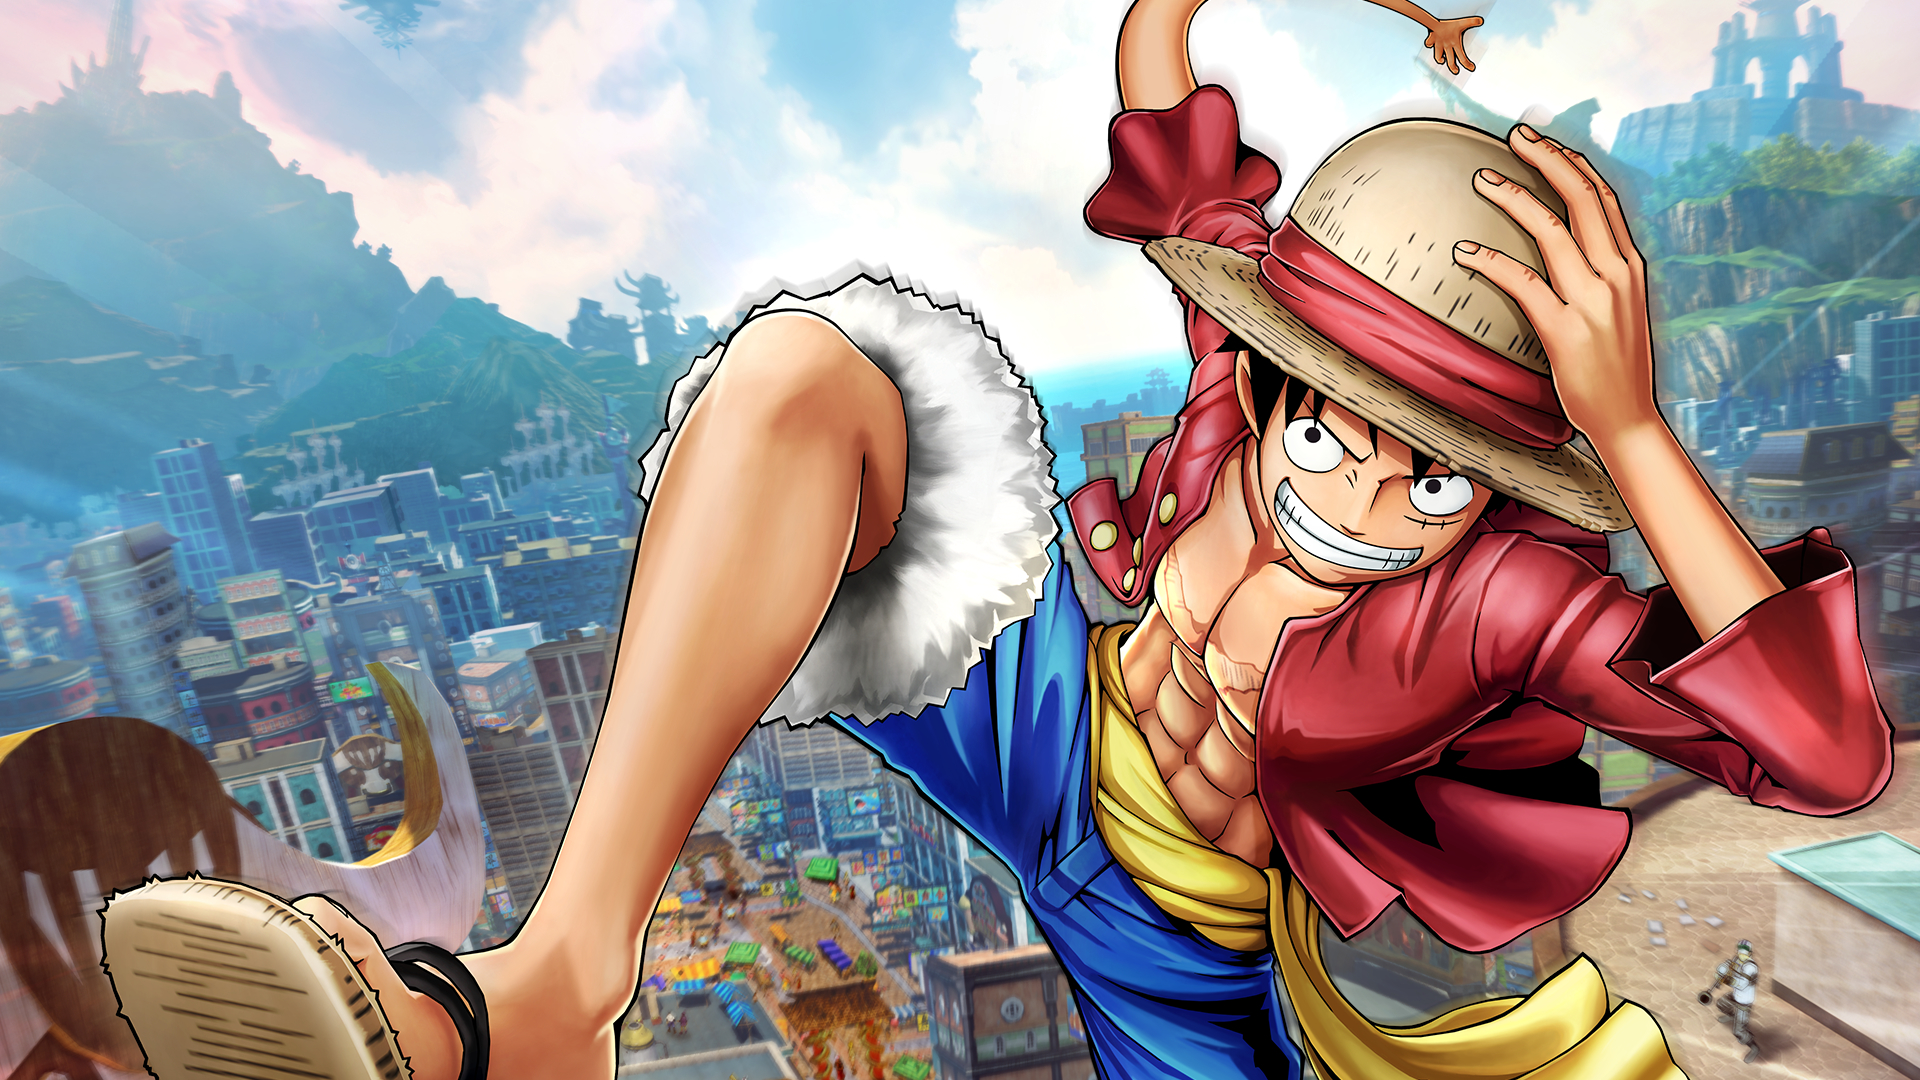 7x1600 One Piece World Seeker 7x1600 Resolution Wallpaper Hd Games 4k Wallpapers Images Photos And Background Wallpapers Den